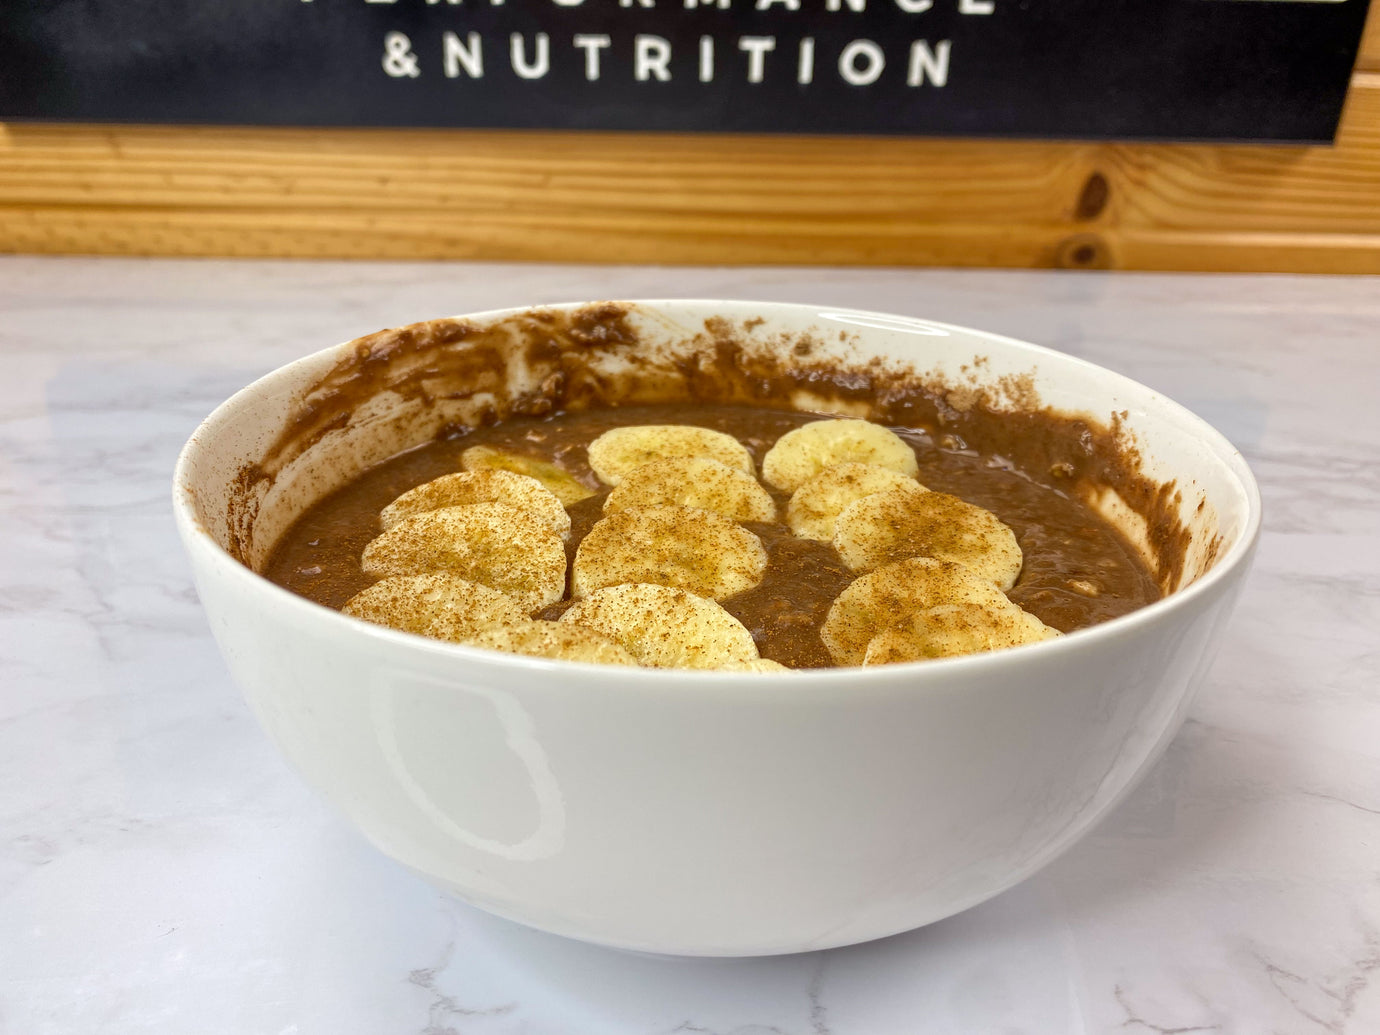 Chocolate Protein Powered Oatmeal